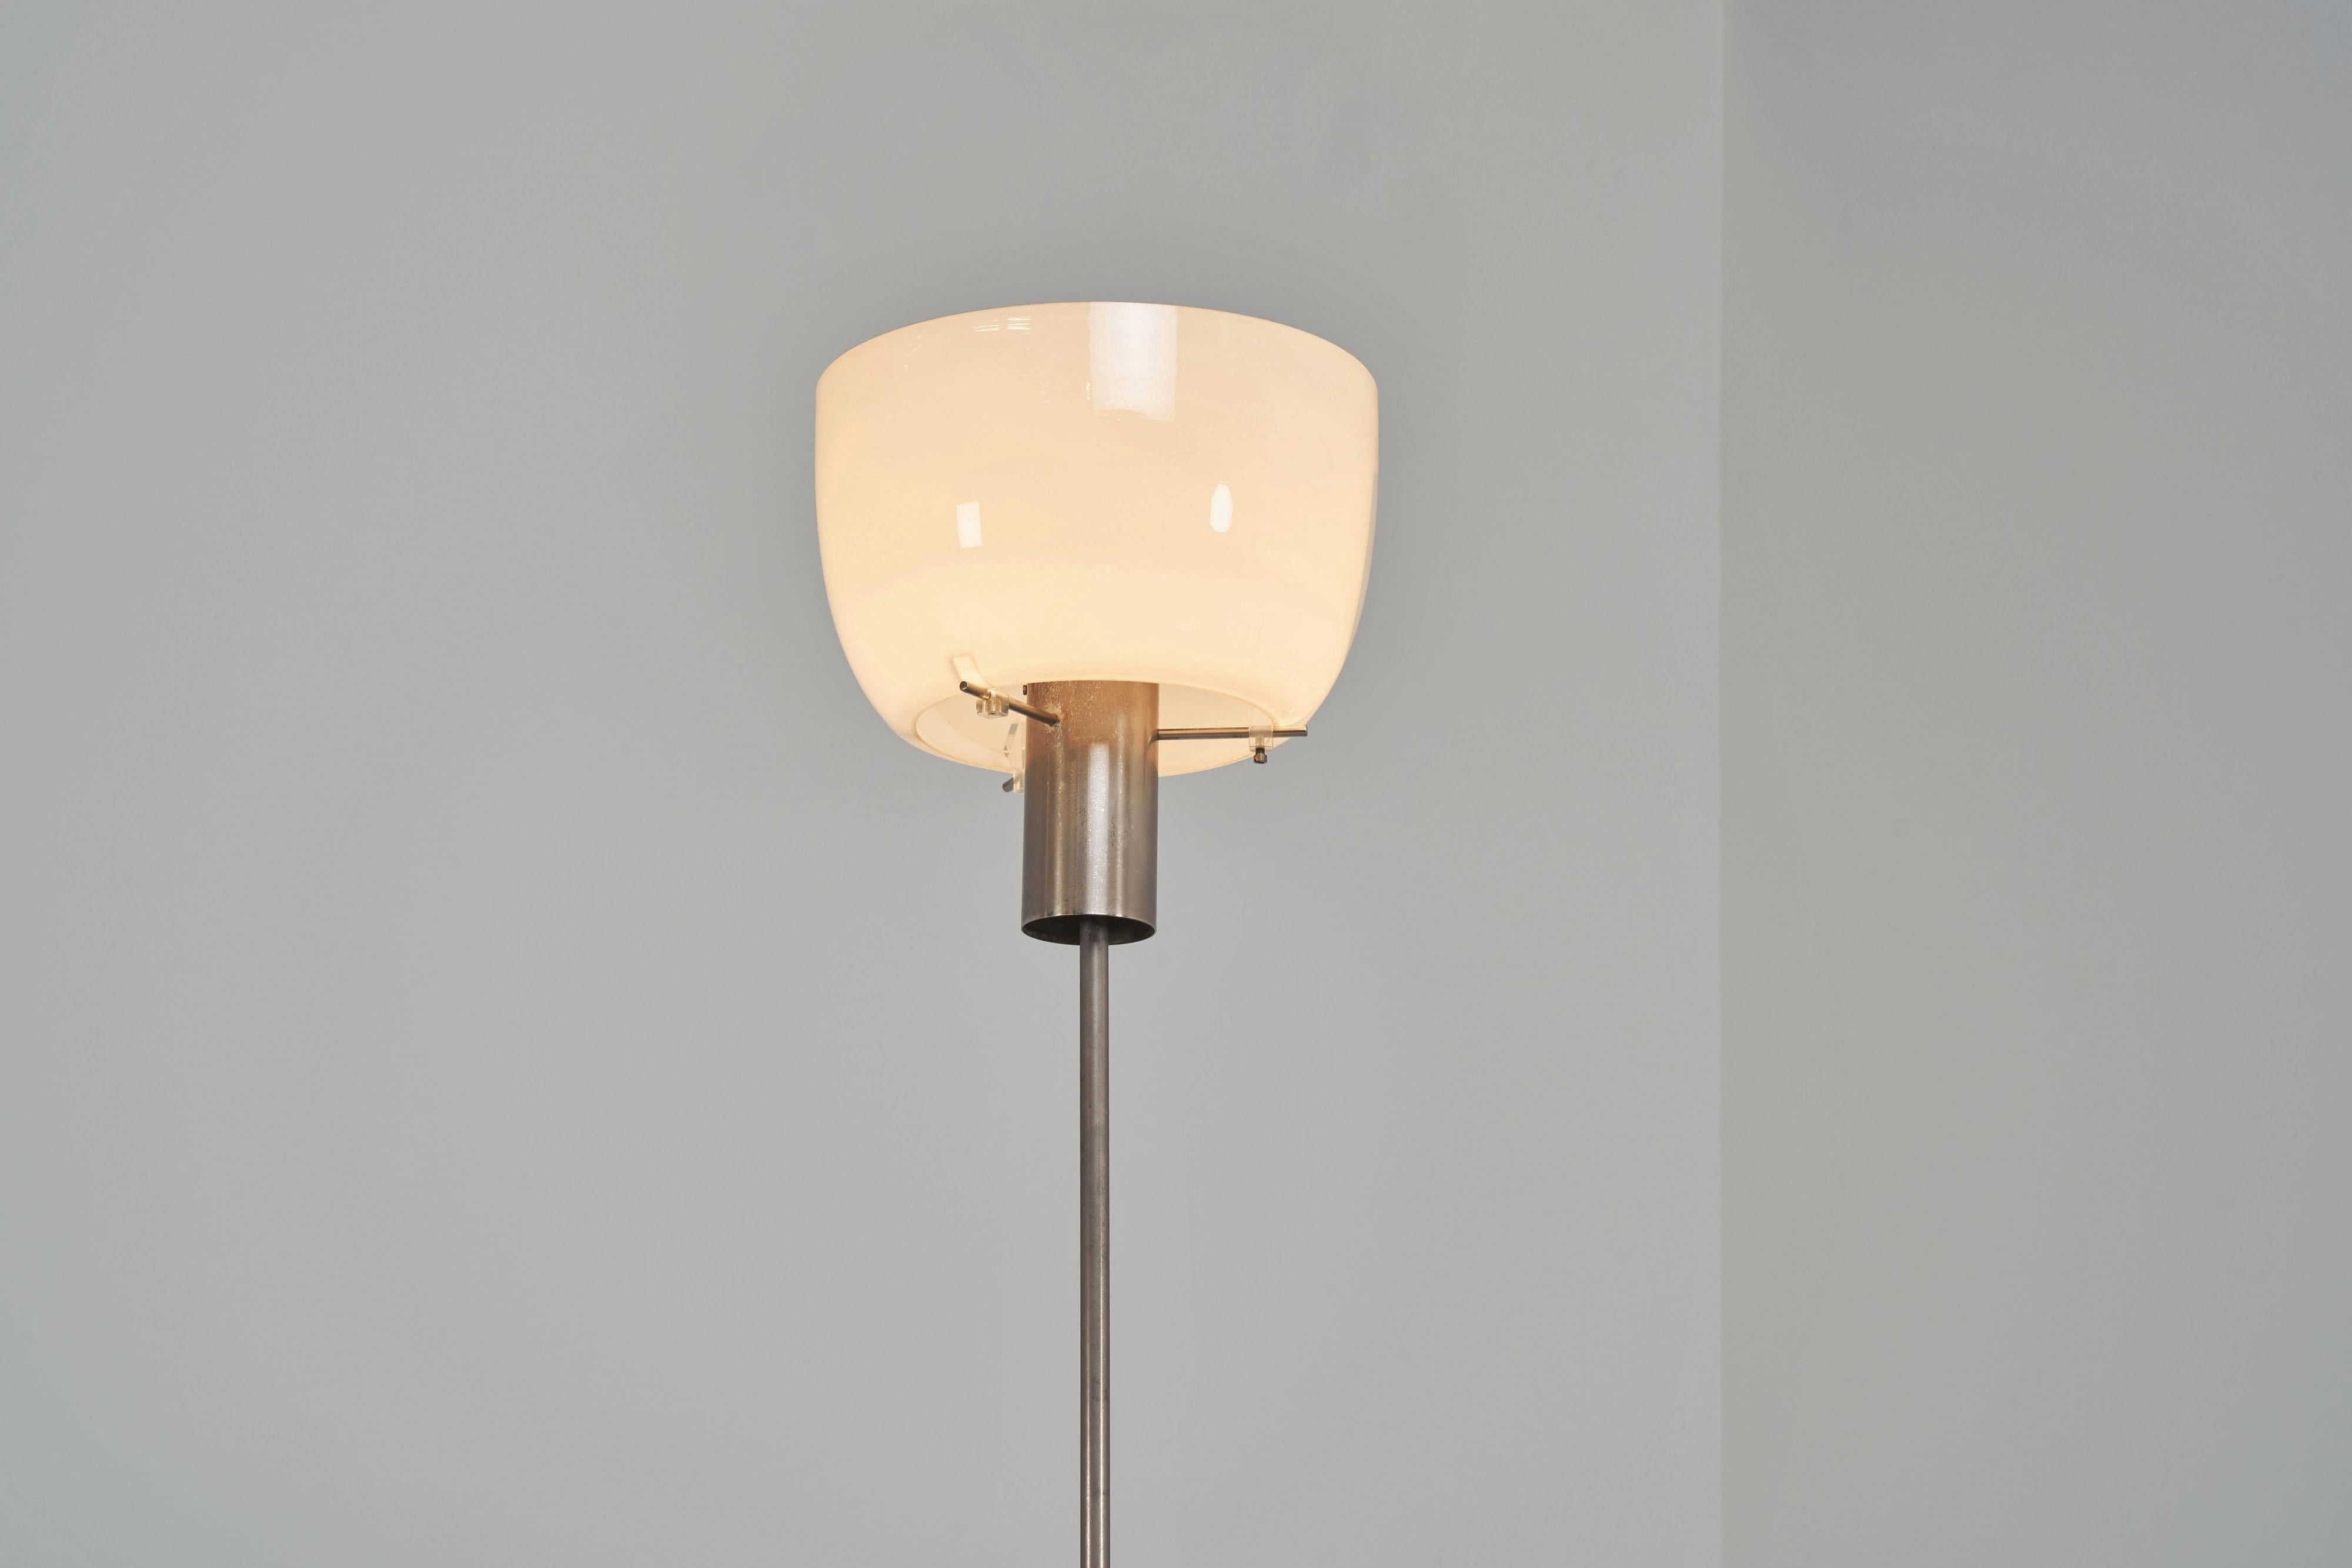 Rare collectible floor lamp model 3306 designed by Giuseppe Ostuni and Renato Forti and manufactured by Oluce, Italy 1955. This minimalistic floor lamp has a matt nickel-plated frame with heavy weighted base, and it has a white blown glass shade